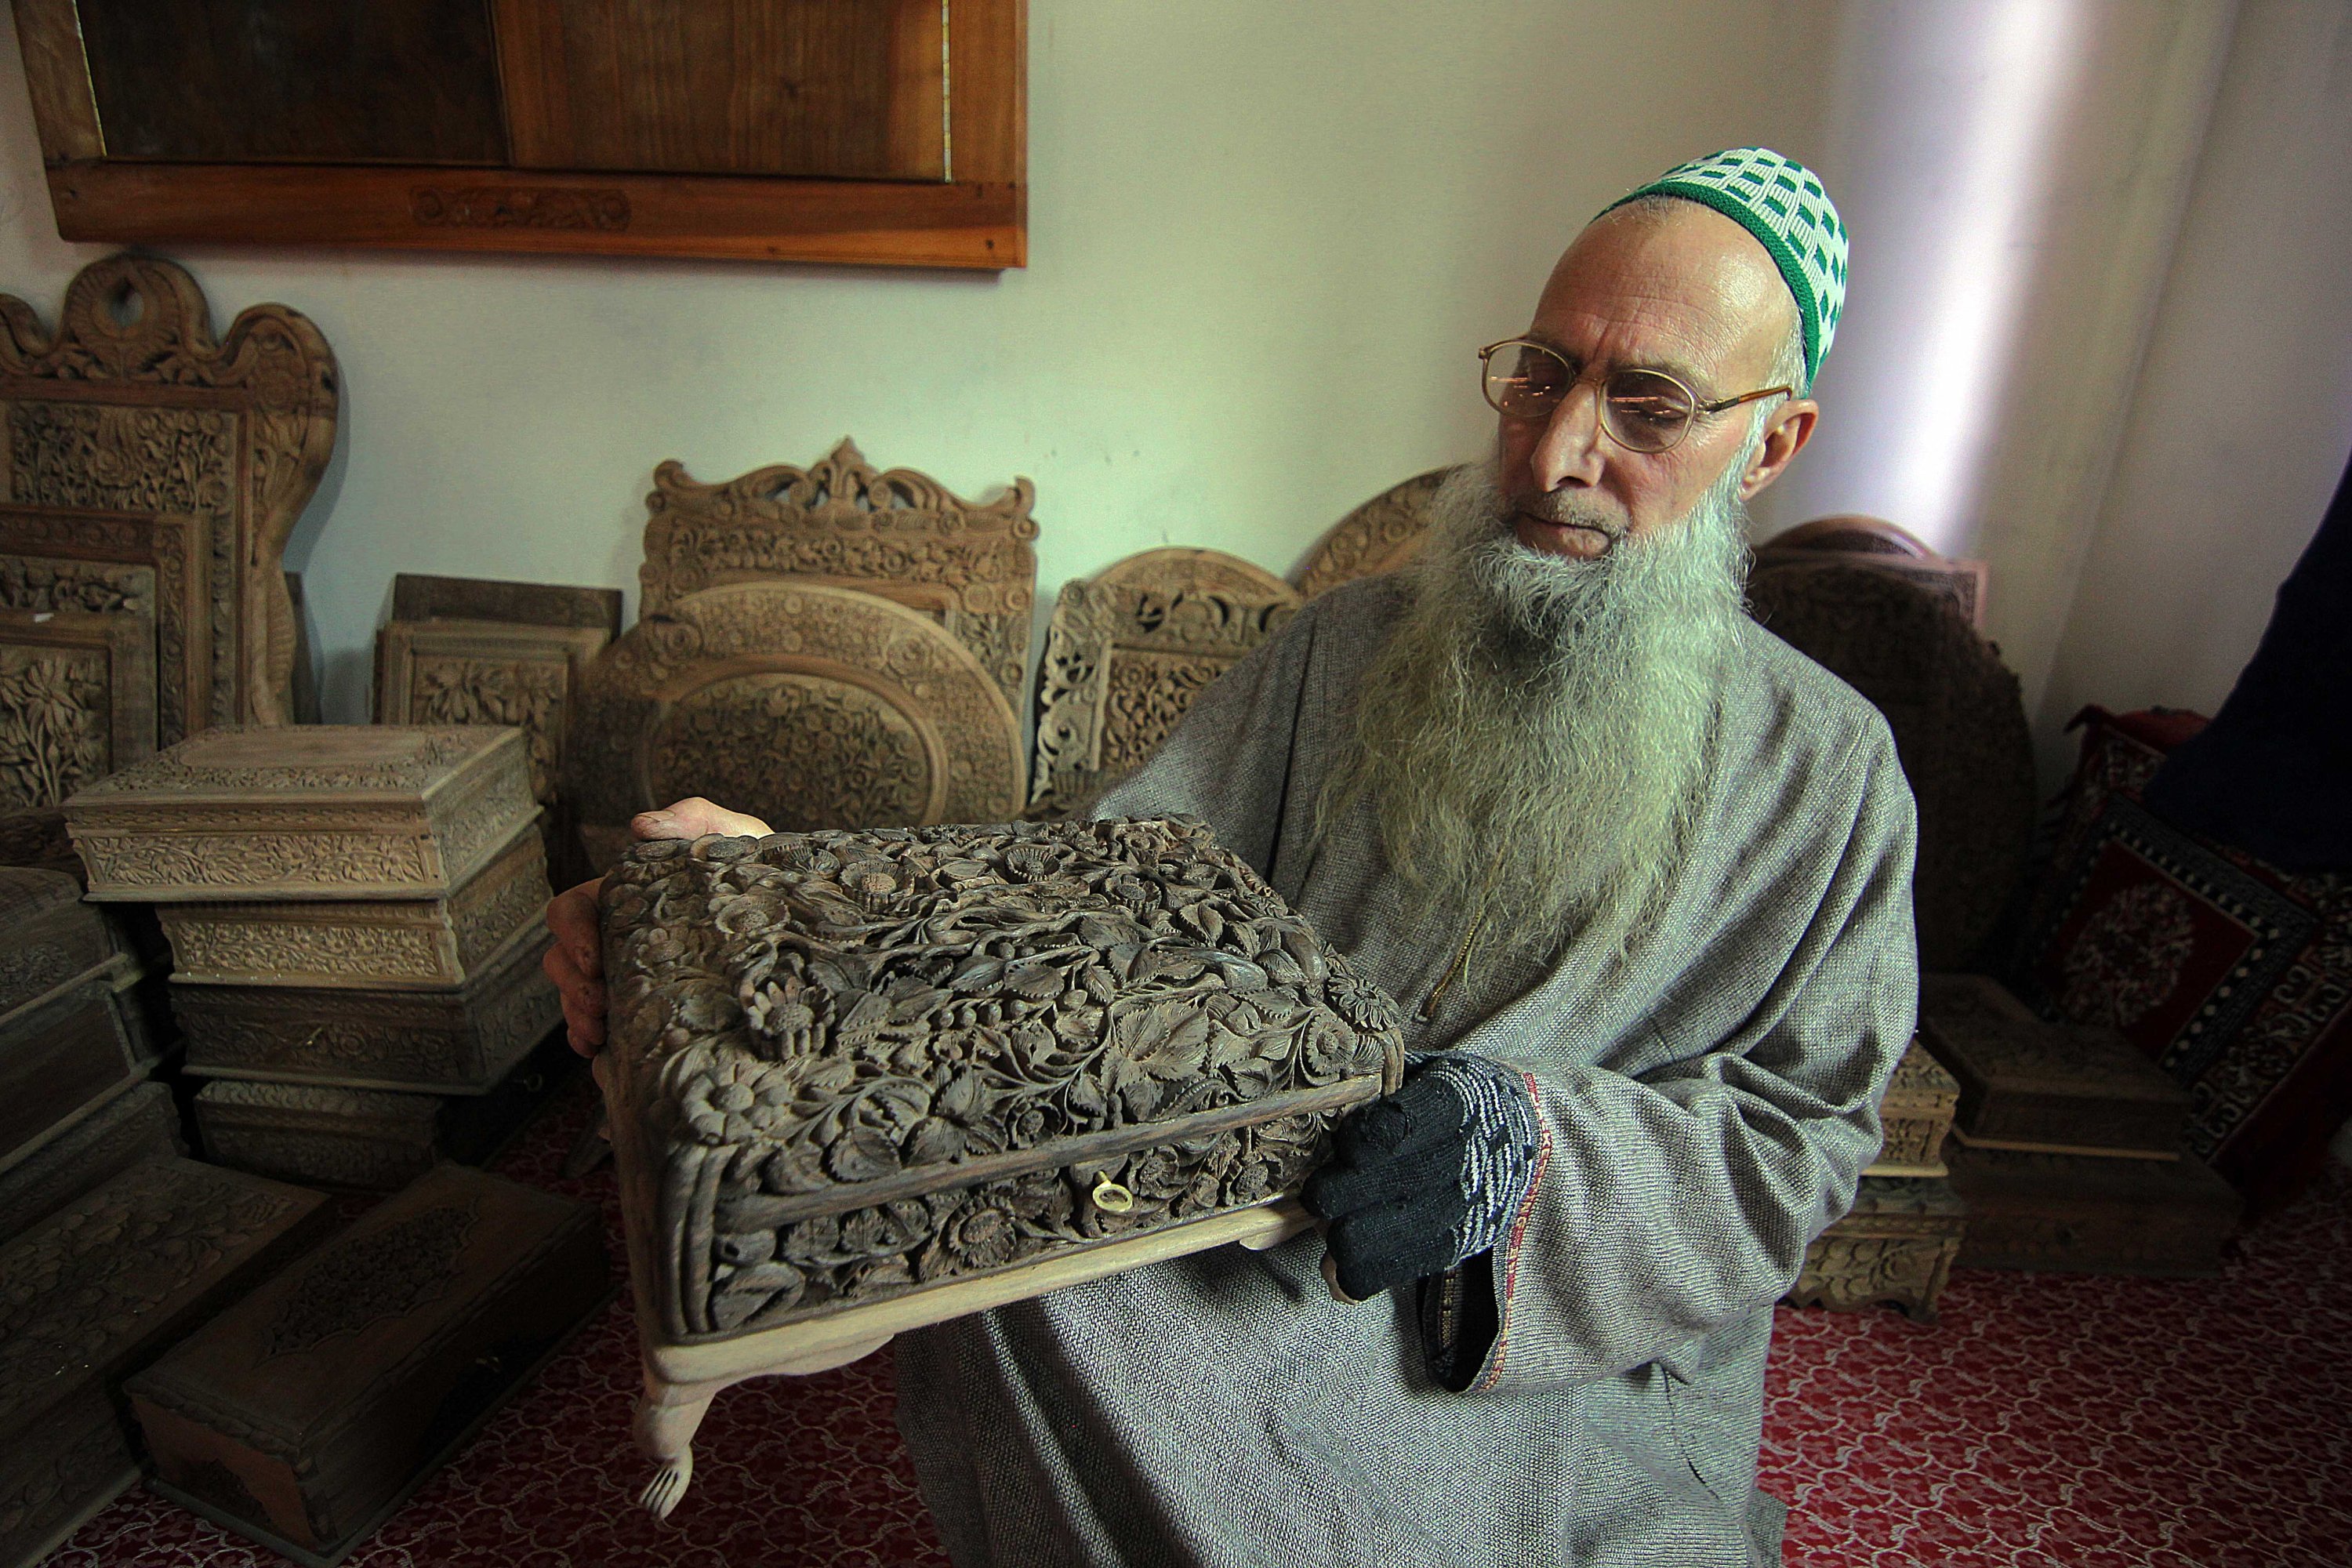 Craftsman Ghulam Nabi Dar shows a hand-carved wooden box in Kashmir, March 14, 2021. (AA) 